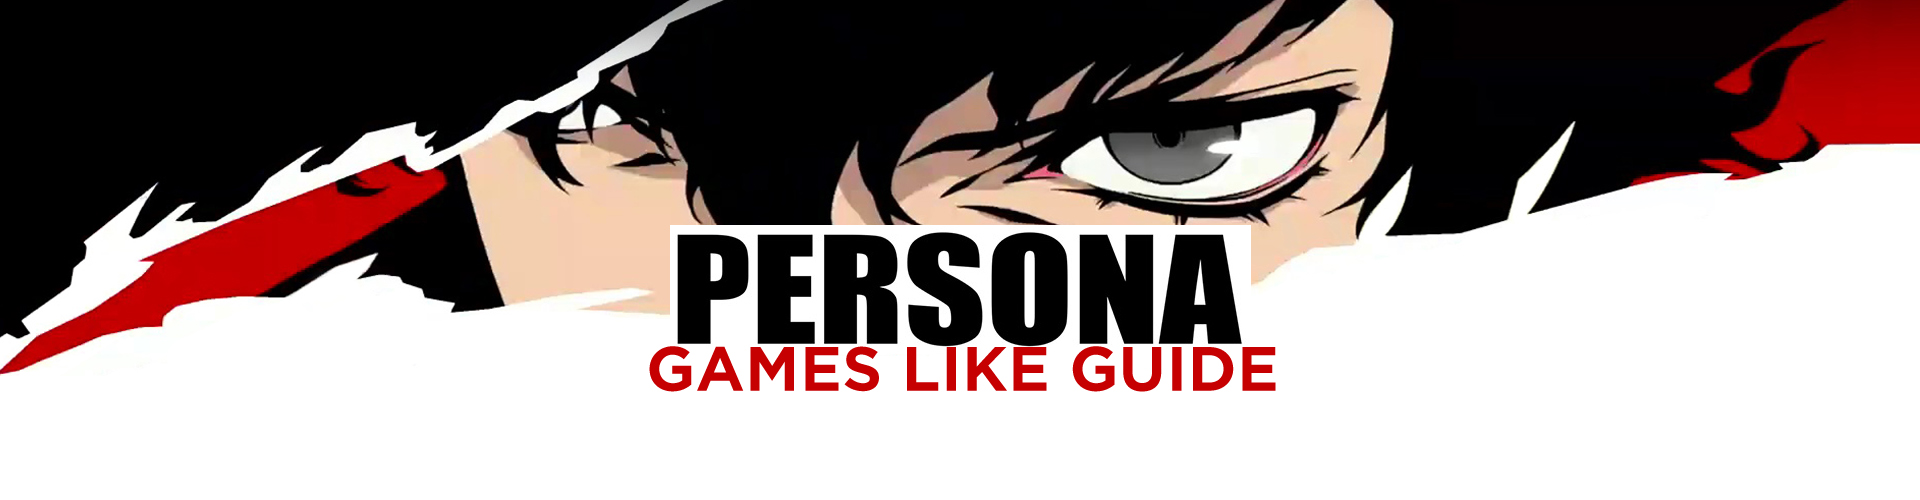 Top 15 Games Like Persona | The Best JRPGs